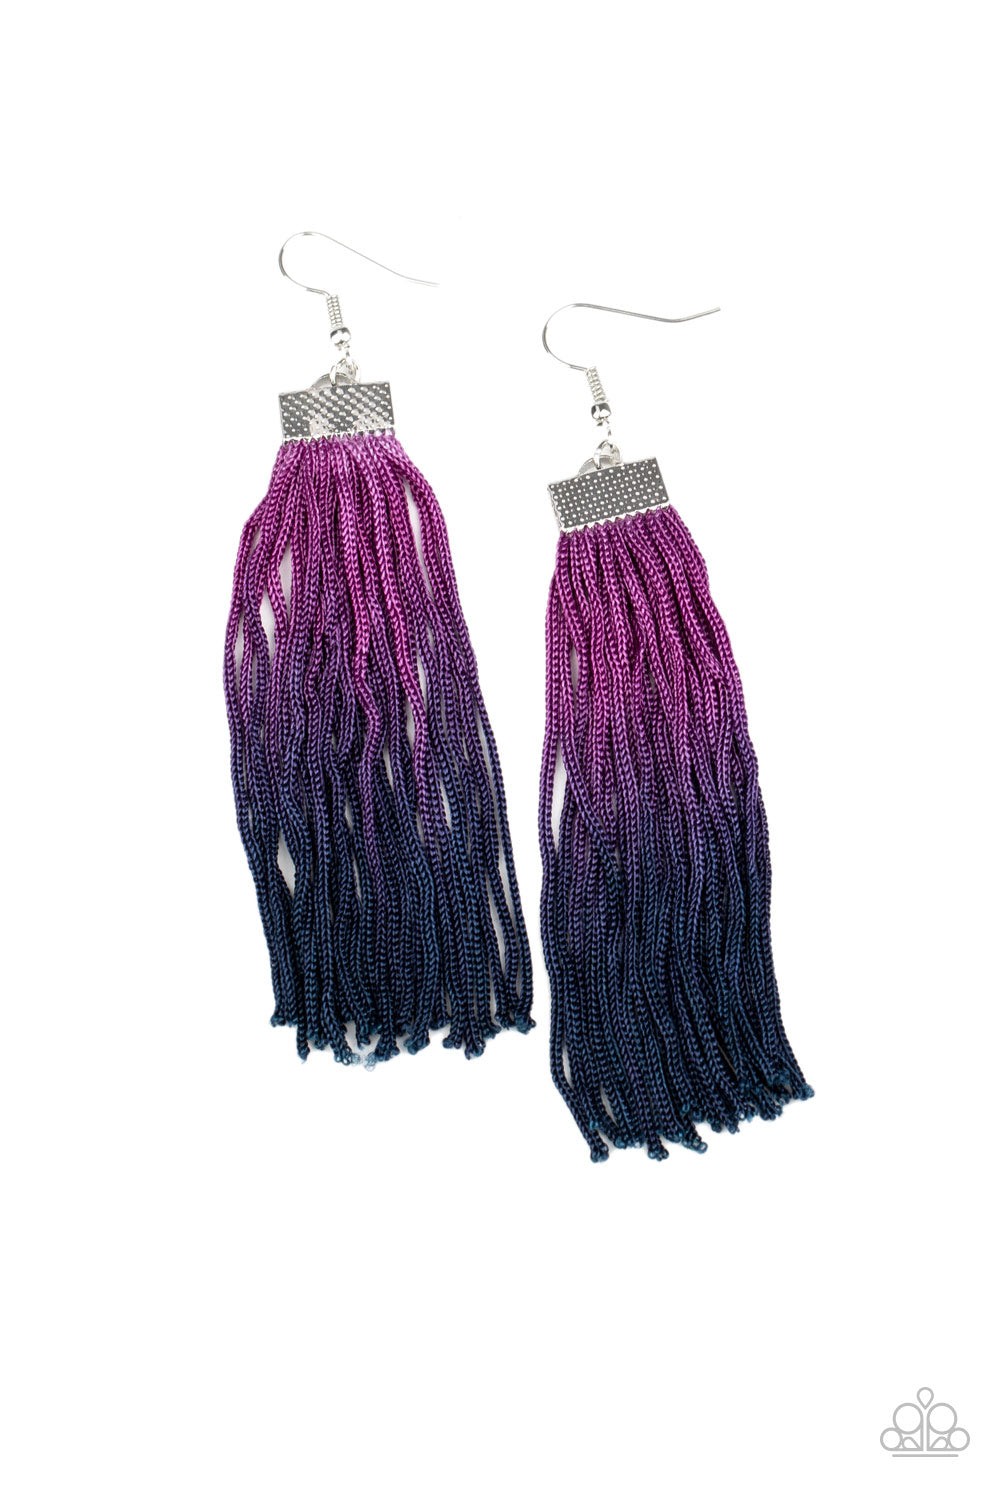 Dual Immersion - Purple Ombre Earrings - Princess Glam Shop